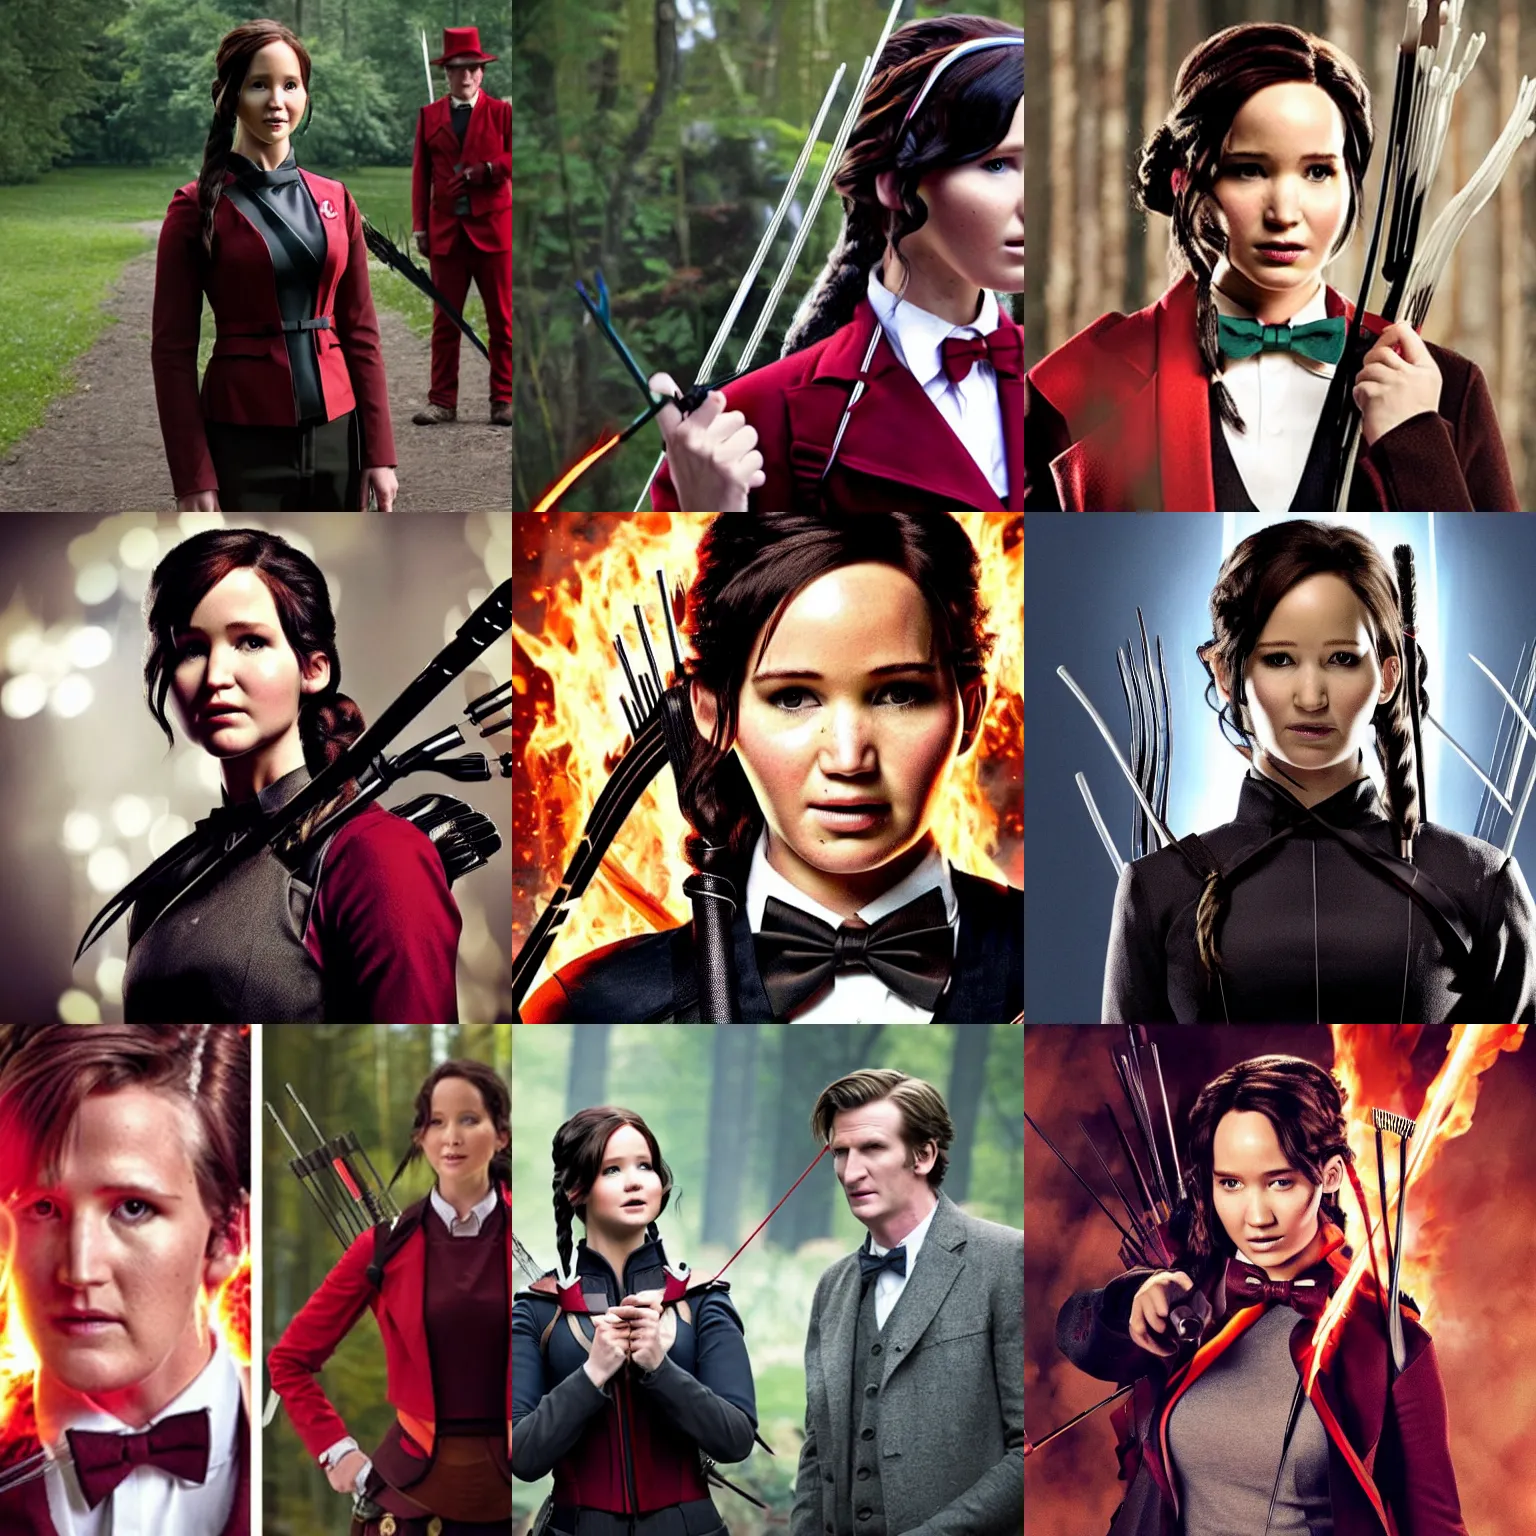 Prompt: Katniss Everdeen dressed as the 11th Doctor from Doctor Who,, wearing a bow tie and fez, promotional image from the BBC